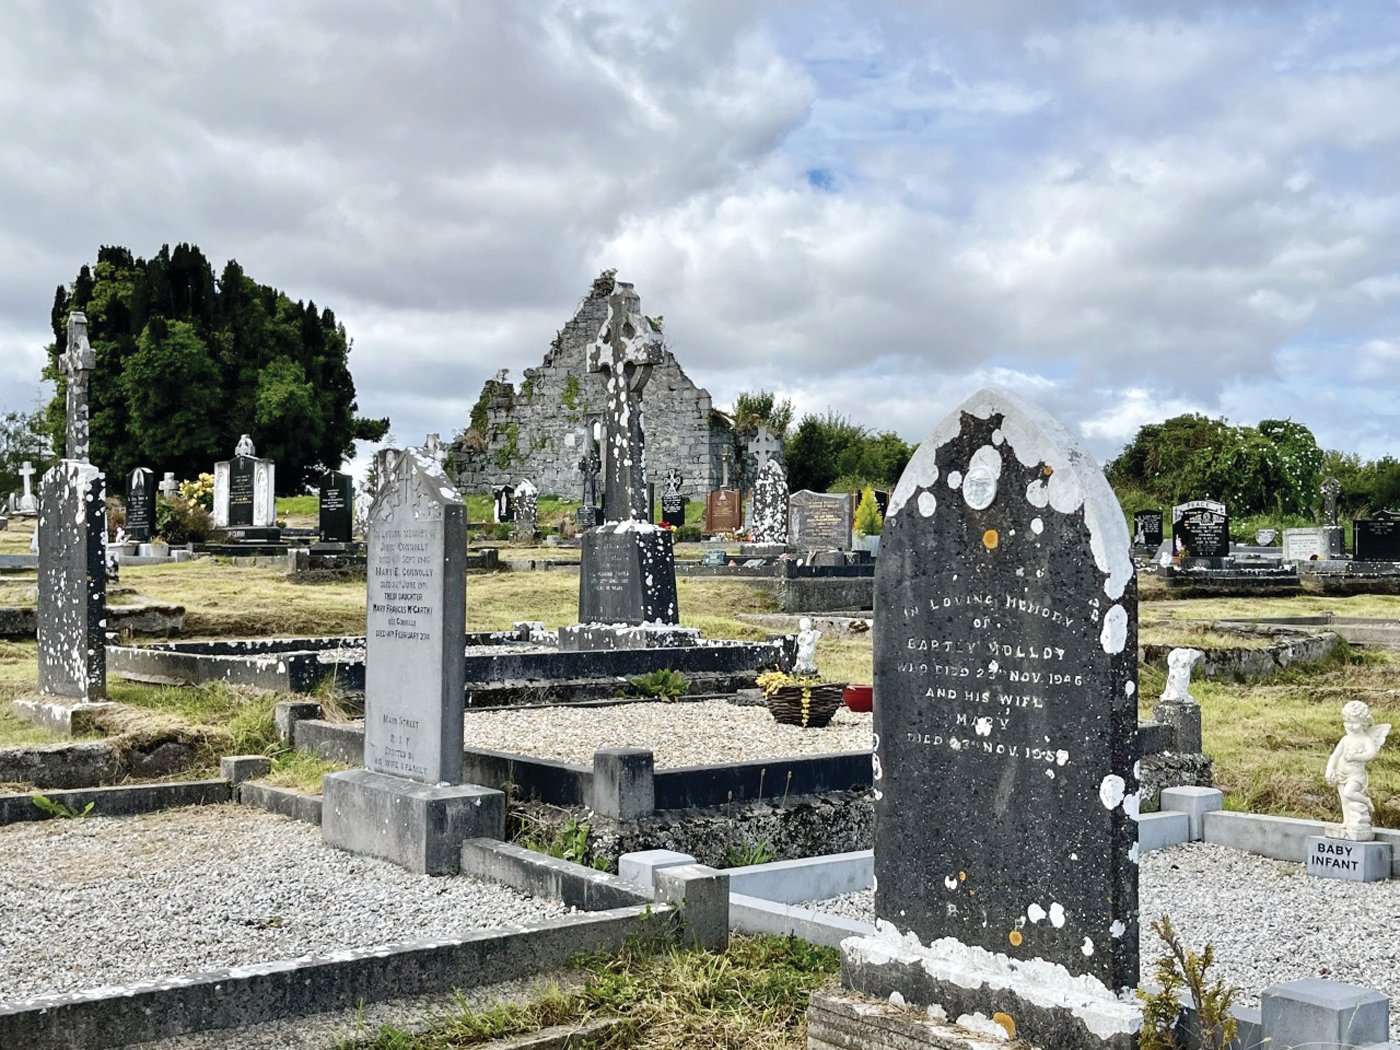 Kilcummin Cemetery, located just outside of town, is Barthly’s final resting place, where the relic of a stone chapel can be seen in the background. The oldest grave dates to 1747.